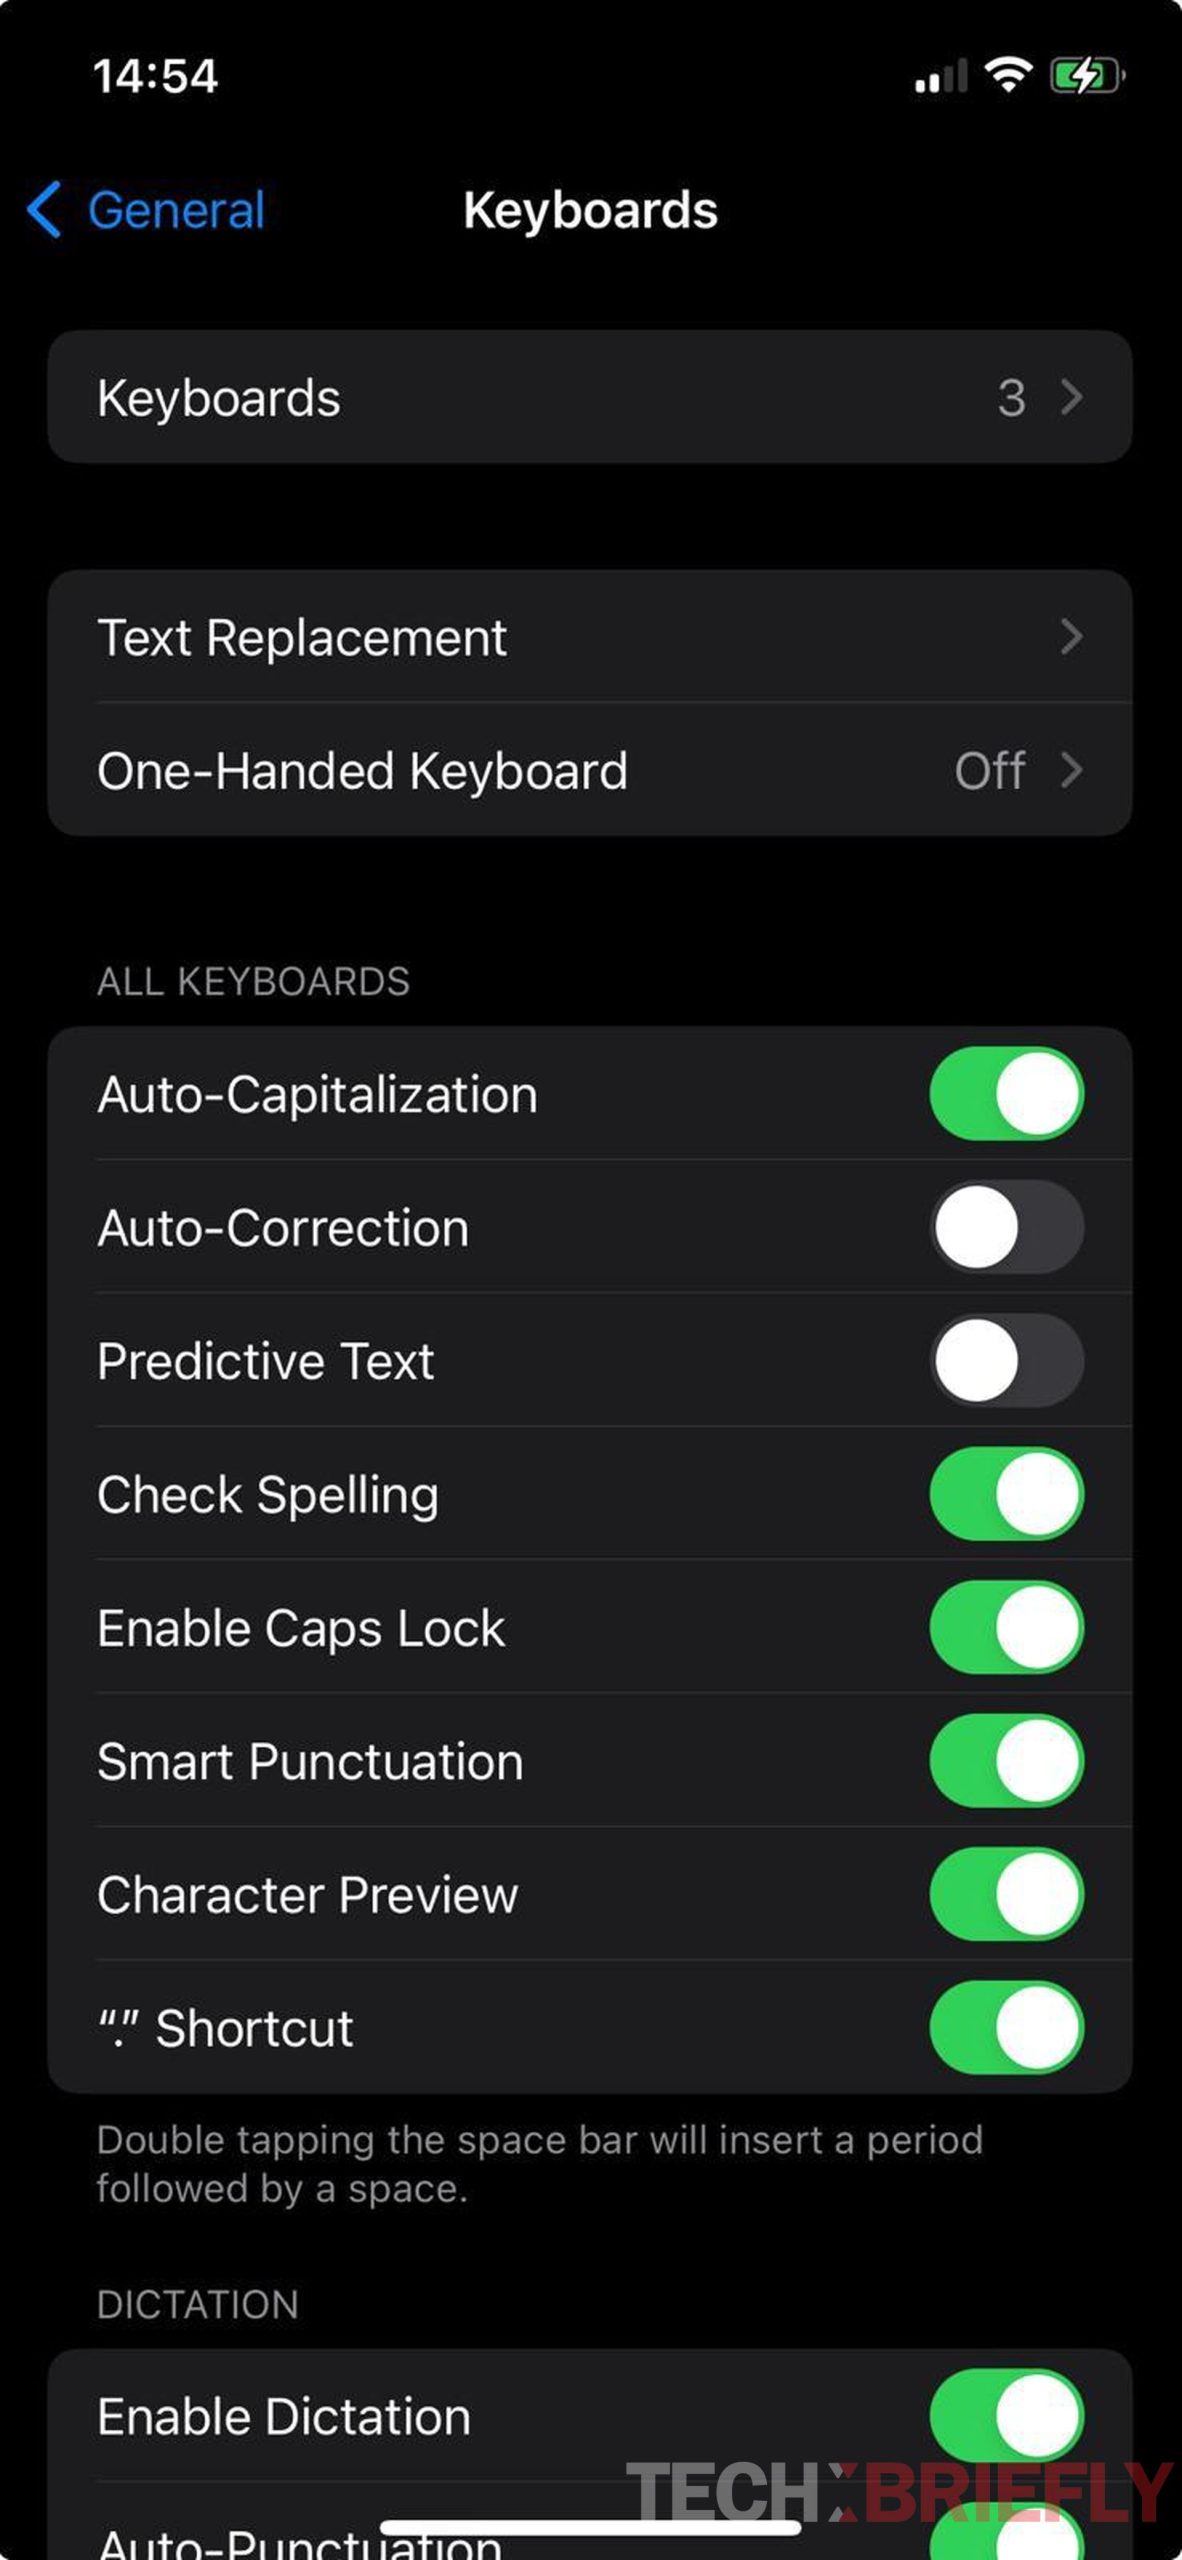 Some iPhone users face with auto-correction issue after updating iOS 17.4